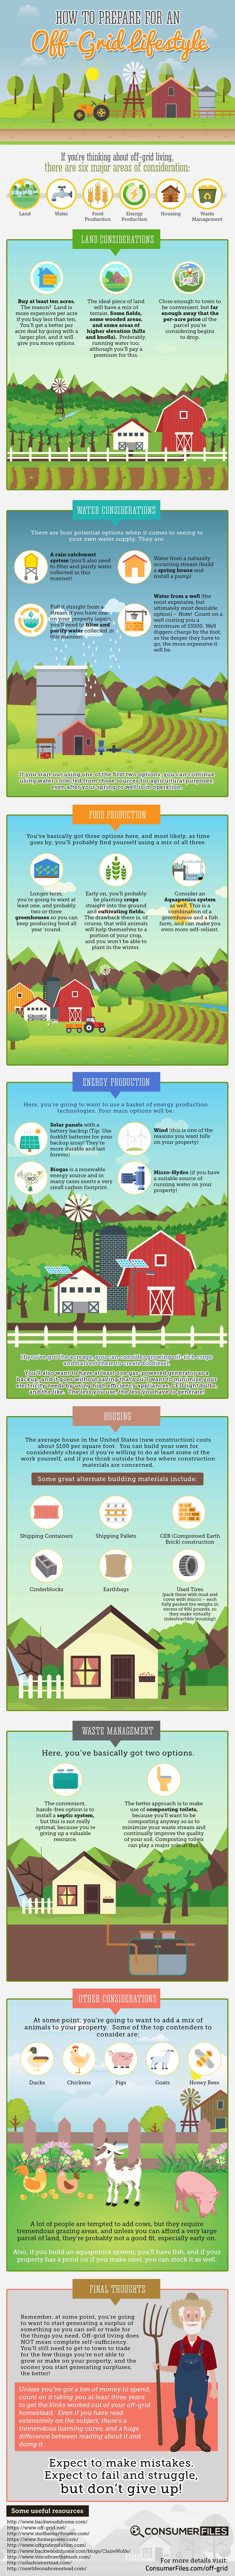 How to Prepare for an Off-Grid Lifestyle Infographic - Consumer Files